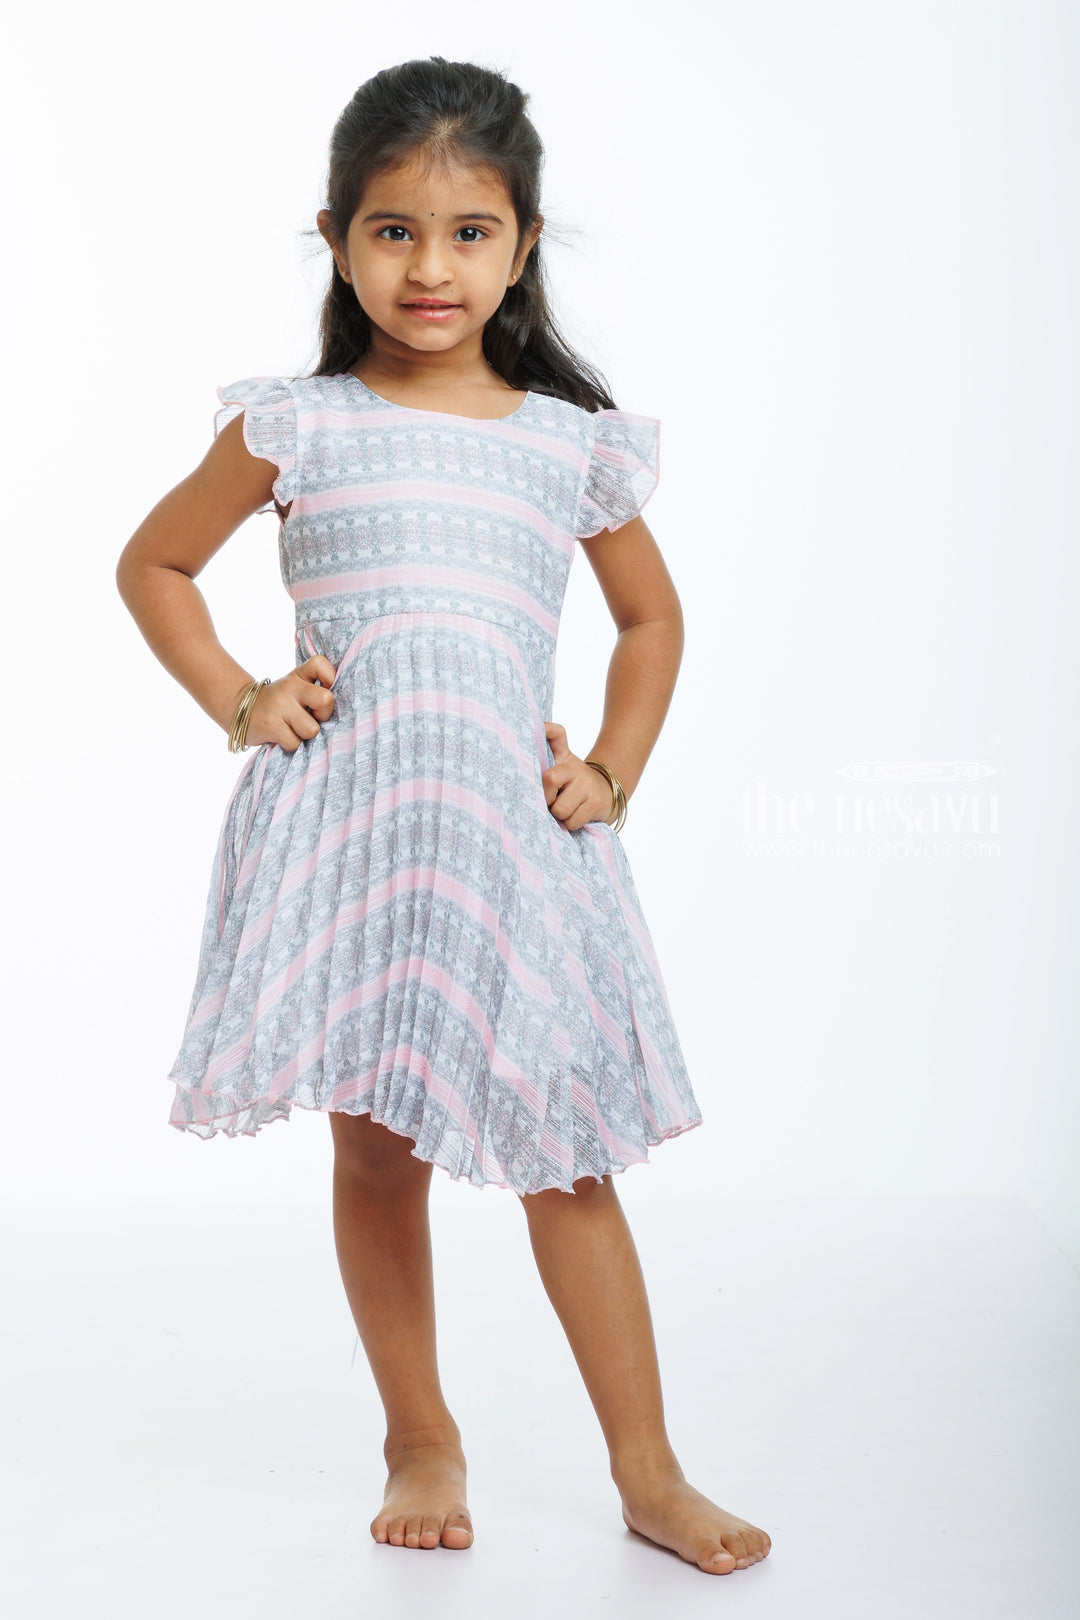 The Nesavu Baby Fancy Frock Girls Summer Breeze Frock with Delicate Floral Stripes Nesavu 16 (1Y) / Salmon / Georgette BFJ541A-16 Charming Floral Striped Girls Frock for Summer Fun | Light and Airy | The Nesavu